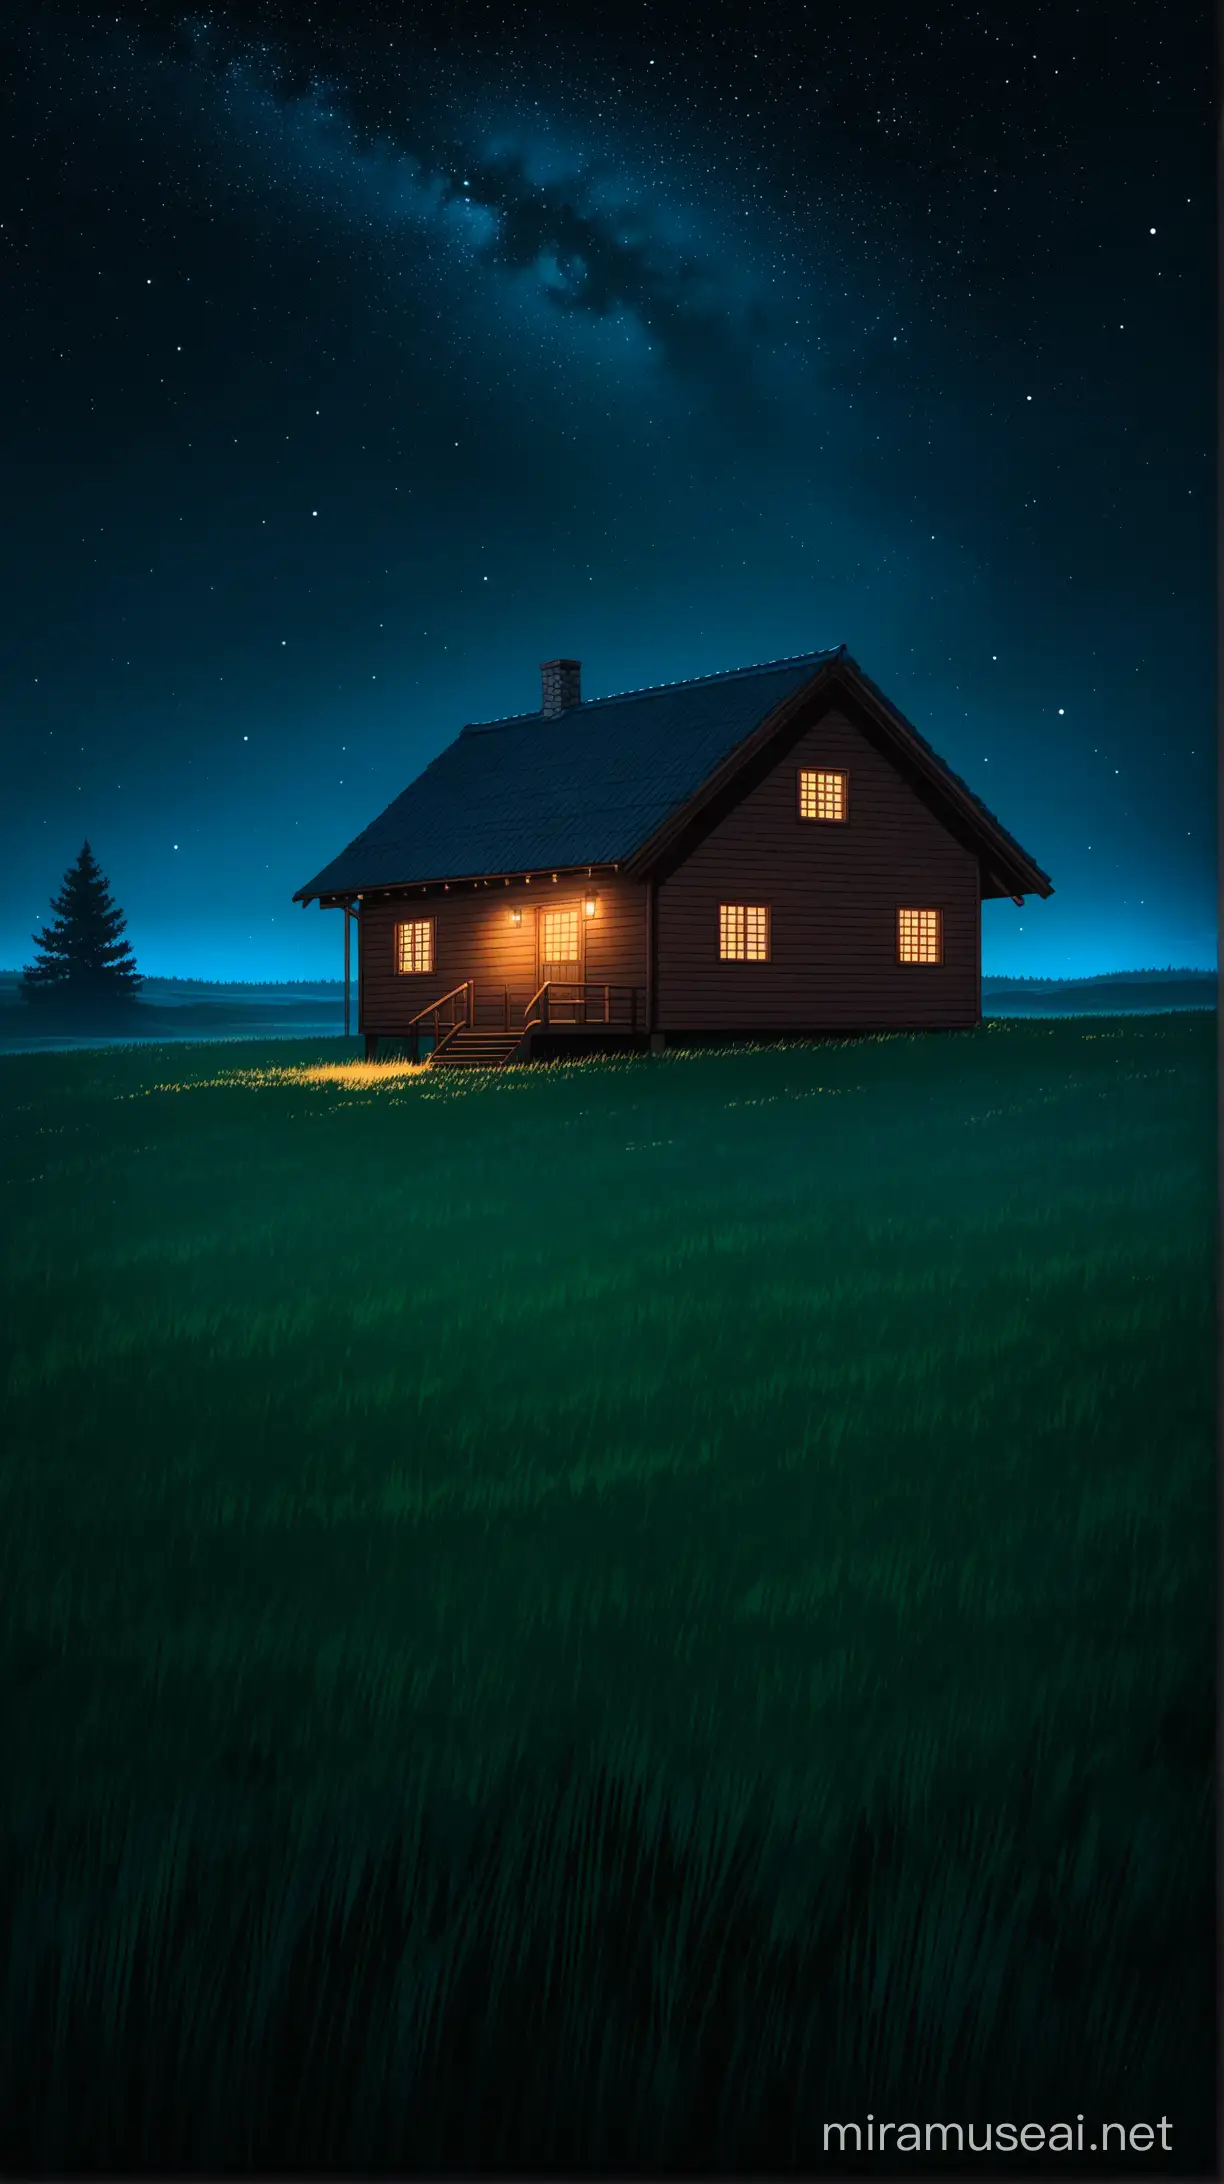 Isolated Wooden Cottage House in Dark Night Sky on Grassland